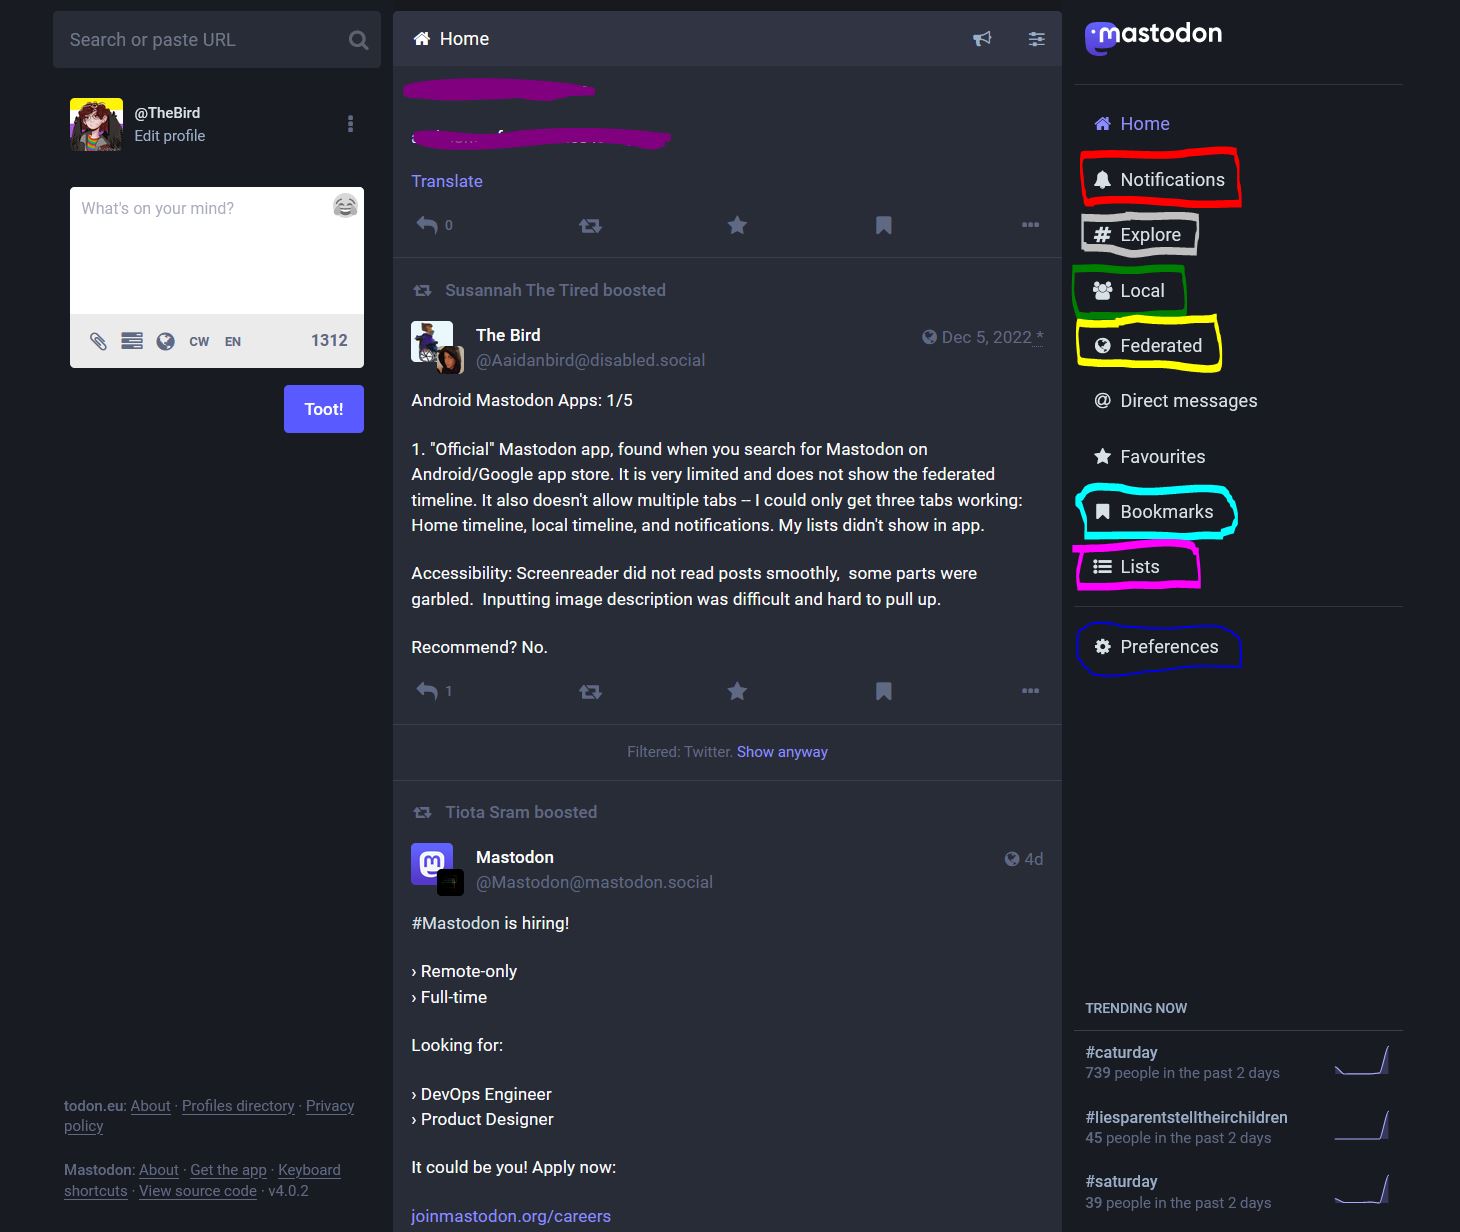 A Screenshot of the Simple Web Interface of Mastodon. It shows the menu on left, where search and post functions are located, the timeline in center, and the right-hand menu that contains the other timeline options and the preferences. Several options in the right-hand menu is colorcoded to emphasize navigation.